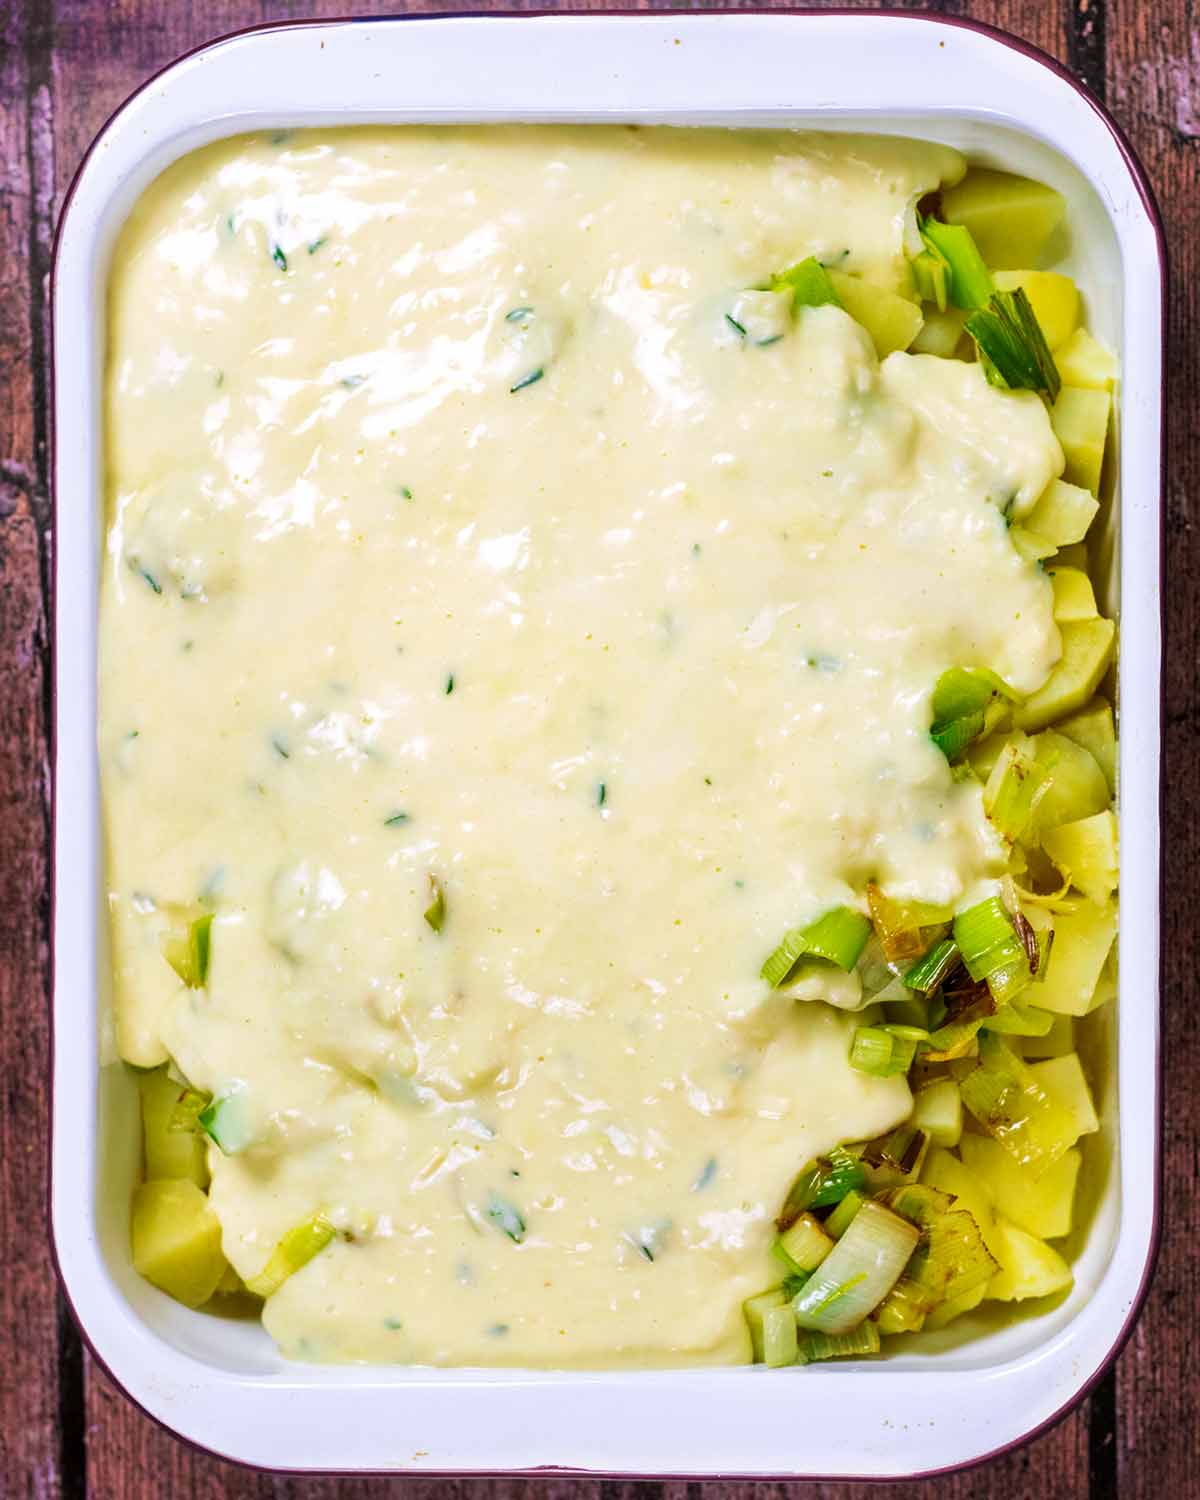 Cheese sauce poured over the potatoes, leeks and onions.